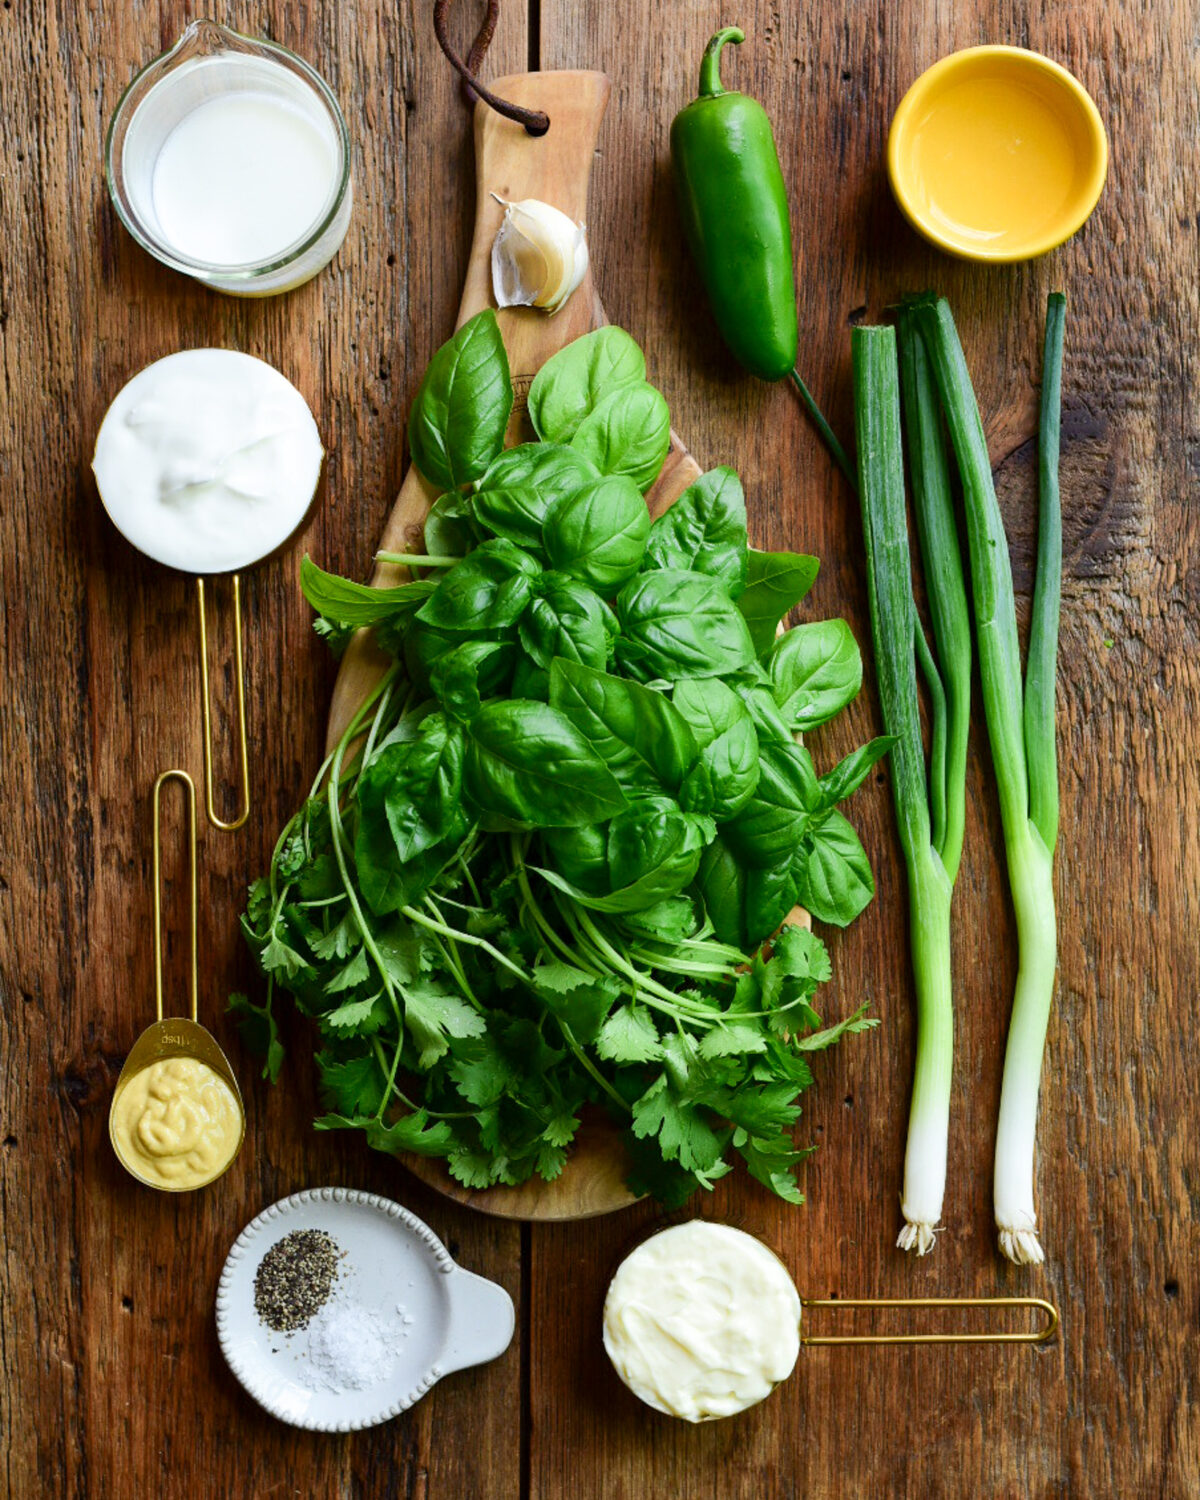 Ingredients for a buttermilk-herb dressing recipe.